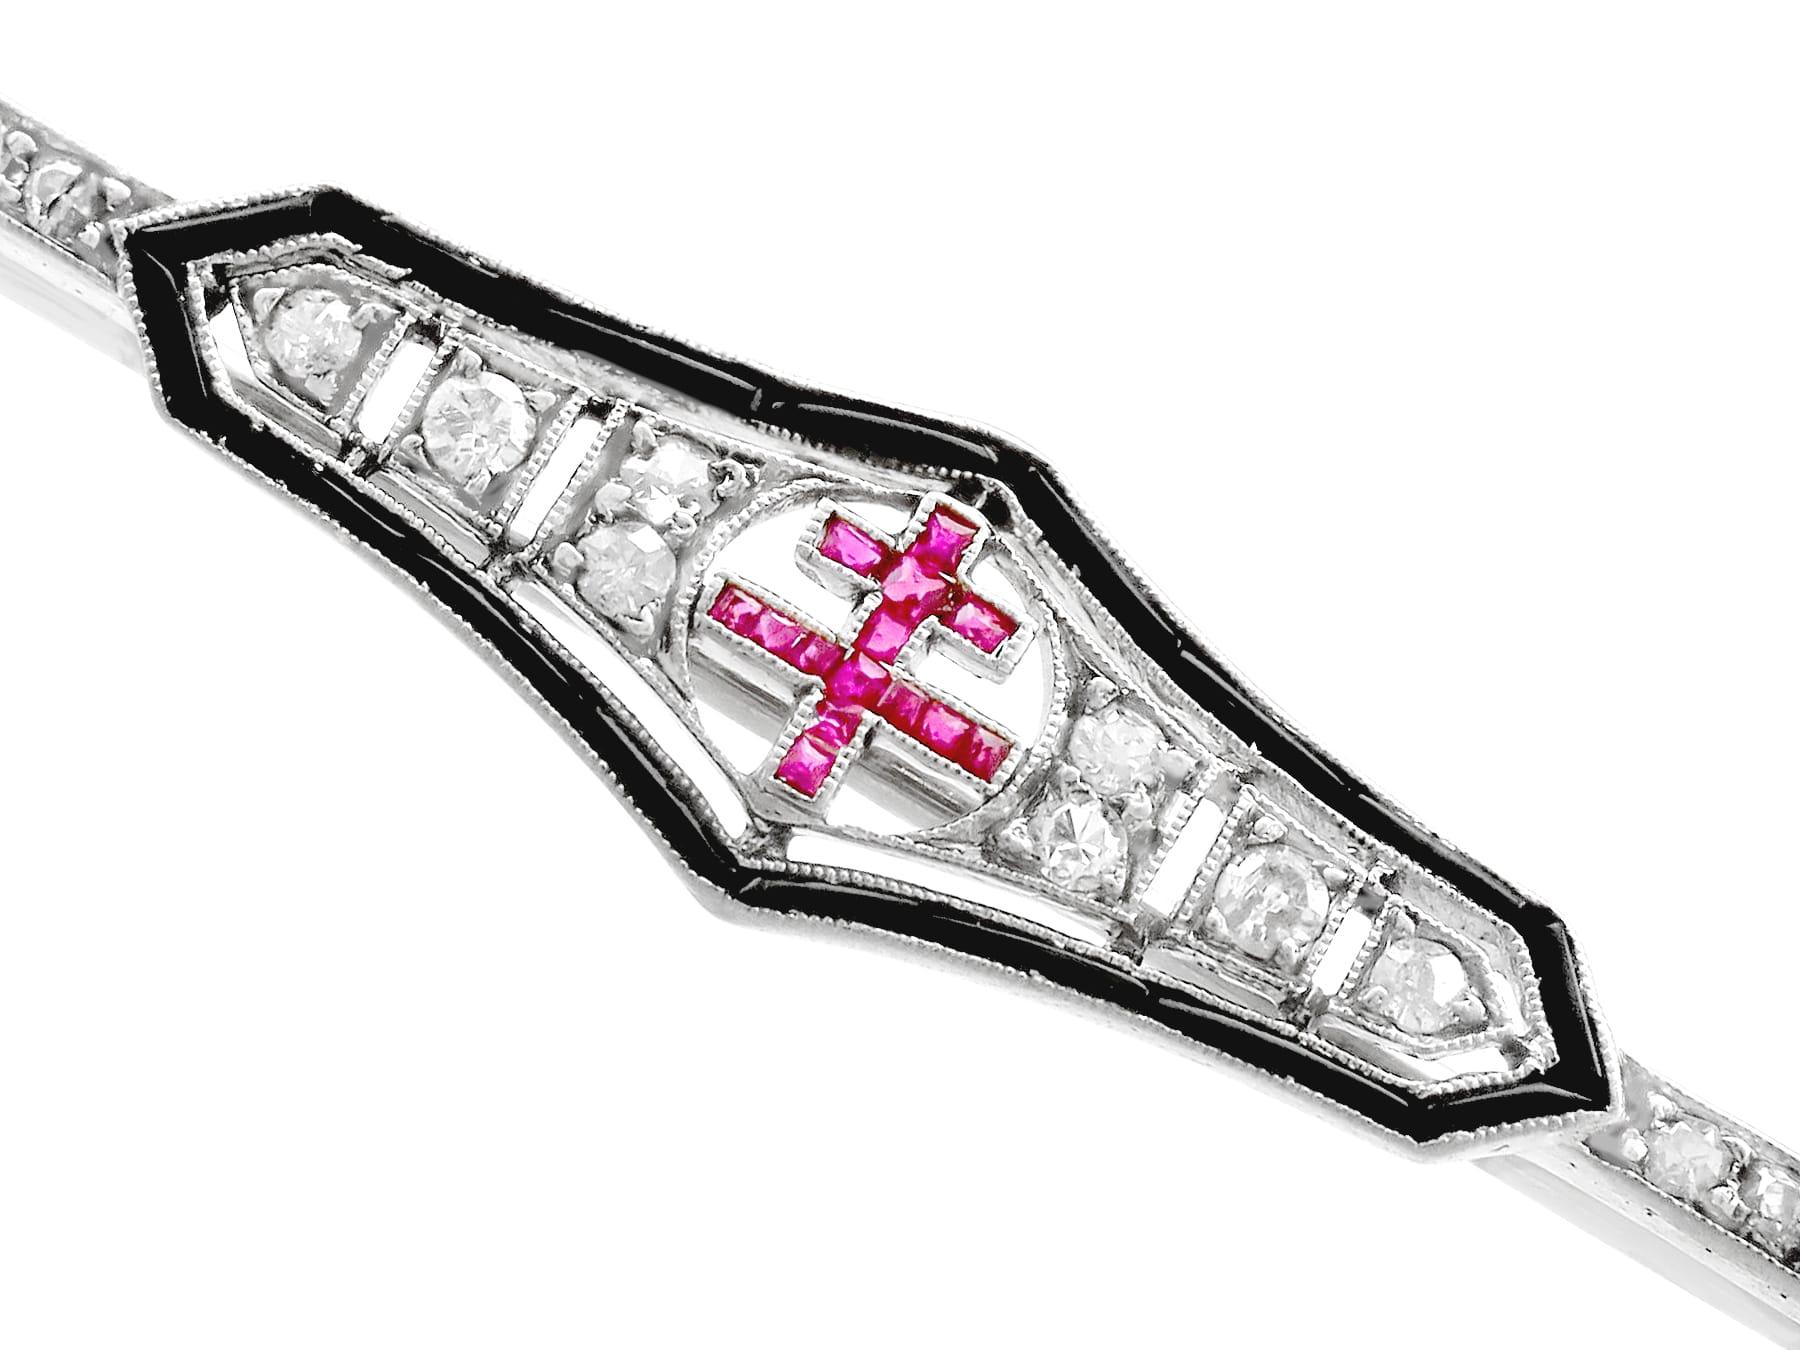 An impressive antique 0.15 carat ruby and 0.96 carat diamond, black onyx and 18 karat white gold bar brooch; part of our diverse antique jewelry and estate jewelry collections.

This fine and impressive antique bar brooch has been crafted in 18k